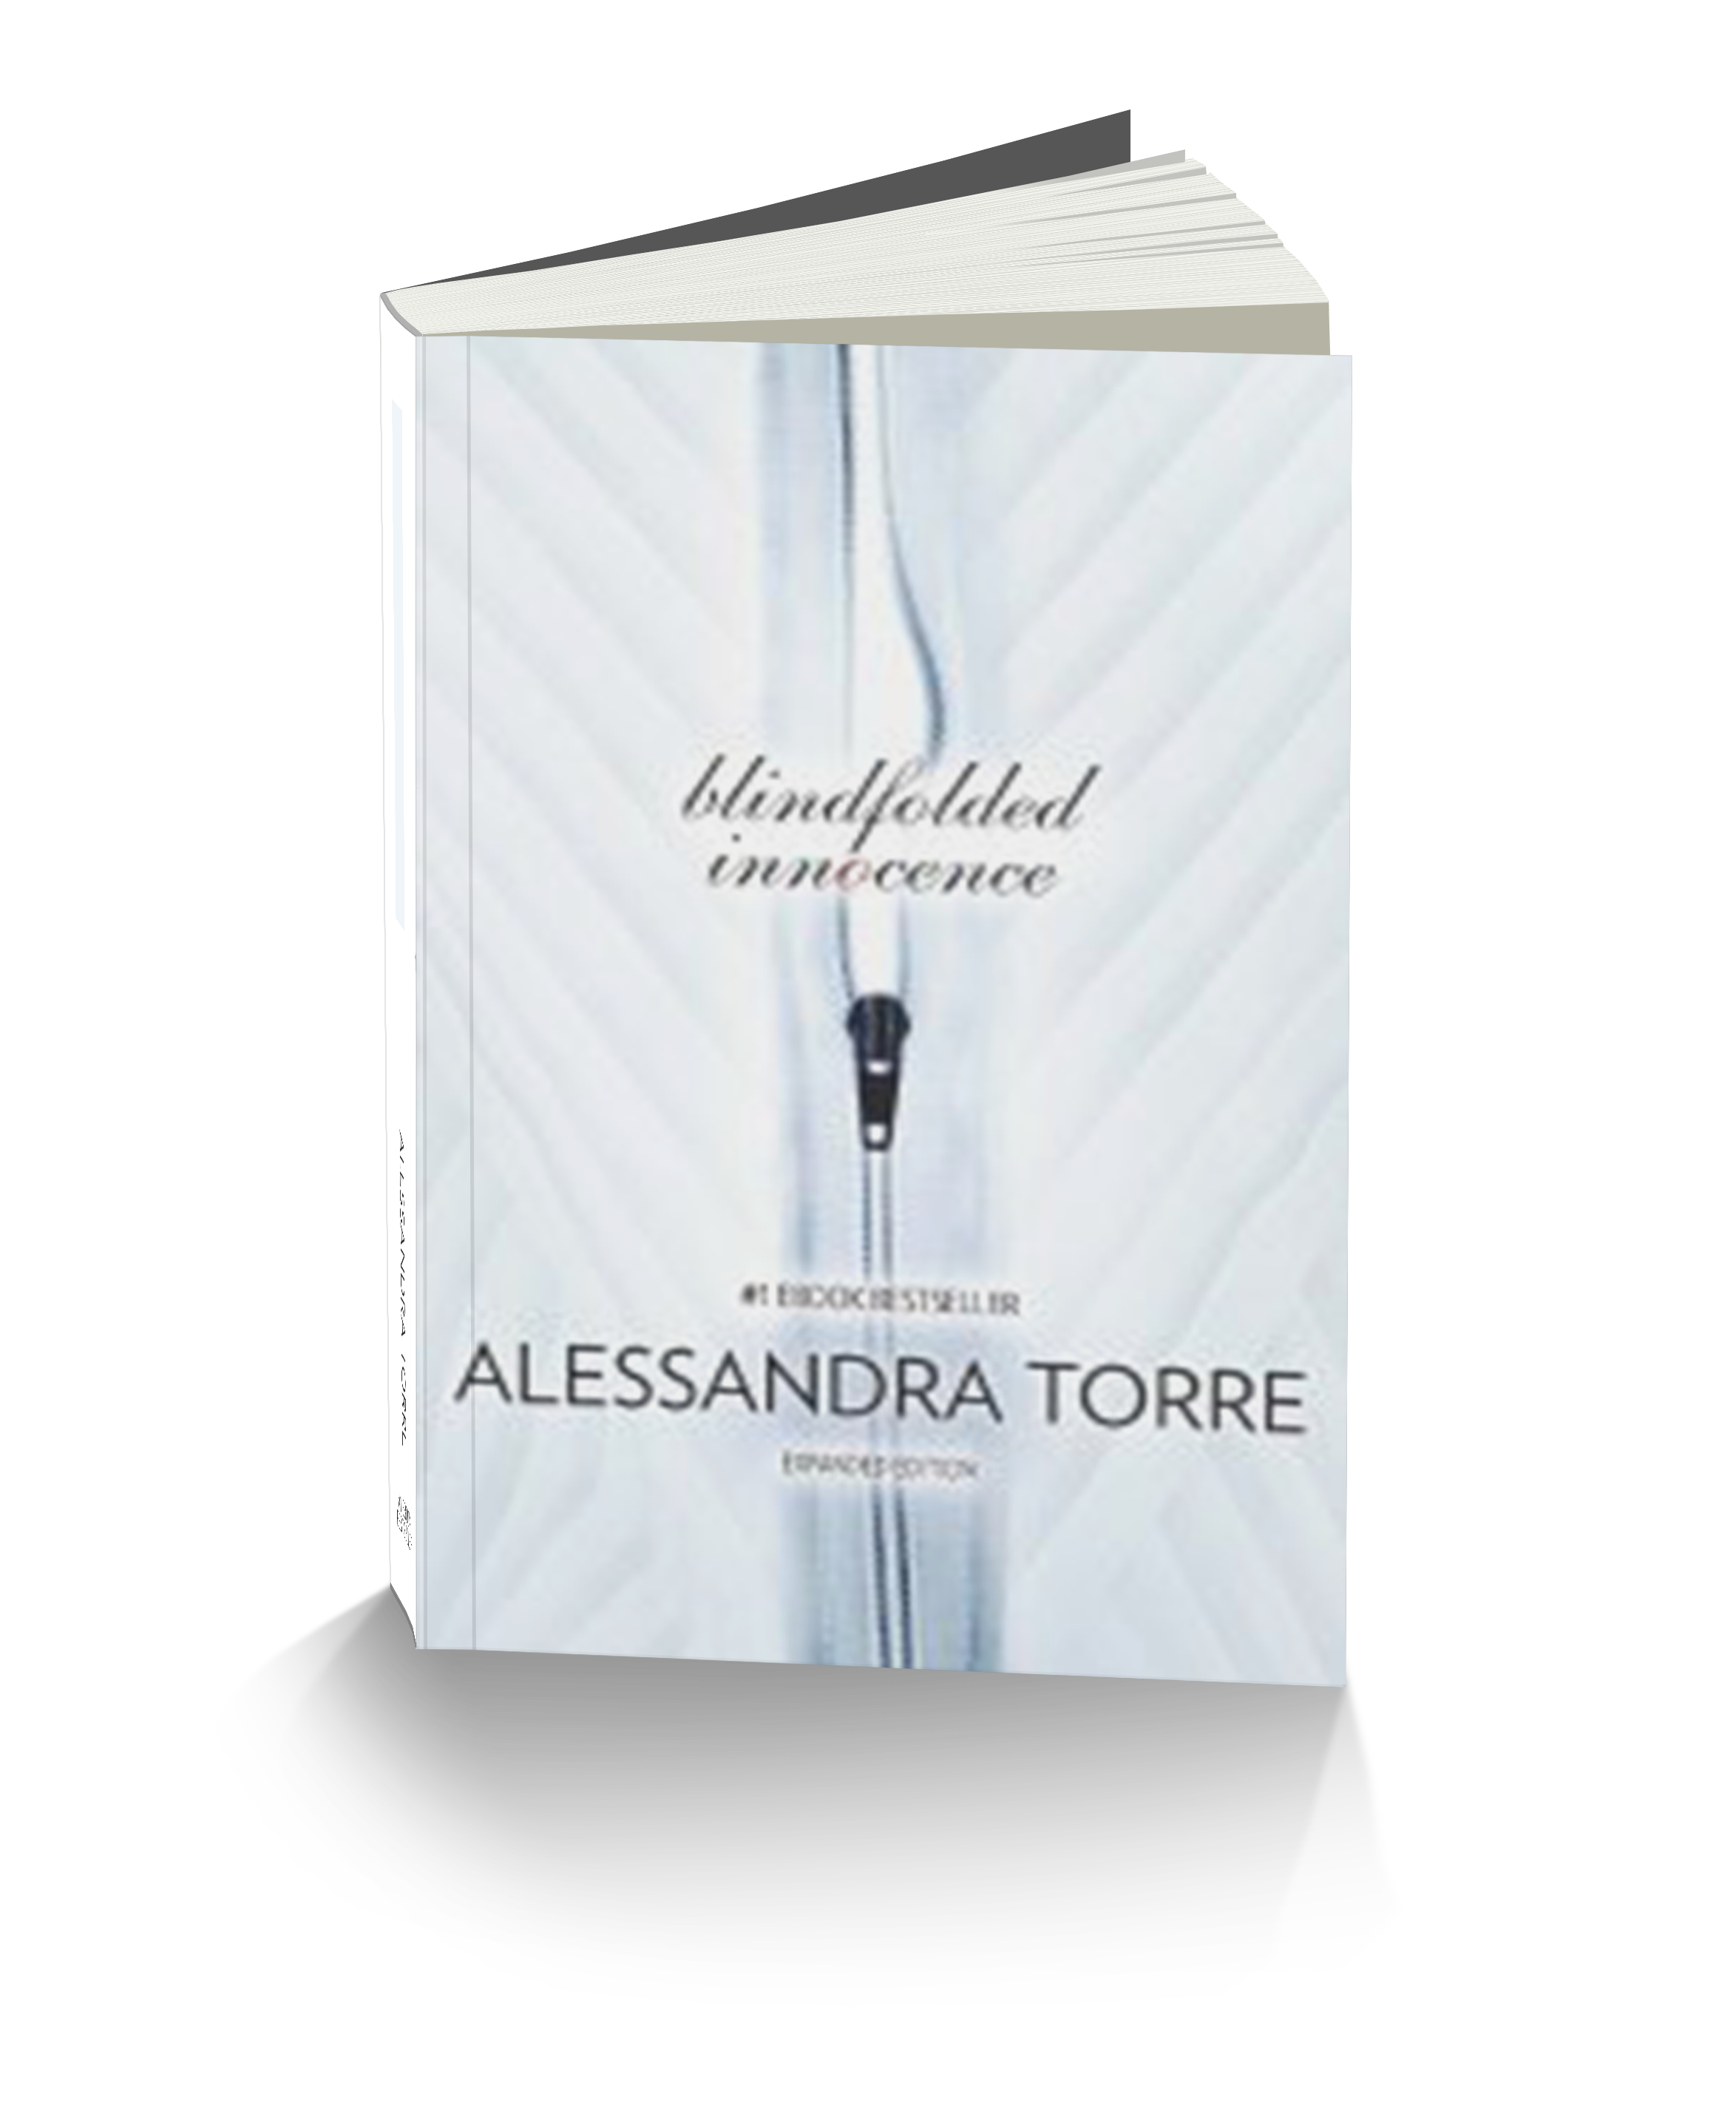 Novels On The Run: BOOK REVIEW - BLINDFOLDED INNOCENCE by ALESSANDRA TORRE  - INNOCENCE # 1 - HARLEQUIN - EROTIC CONTEMPORARY ROMANCE